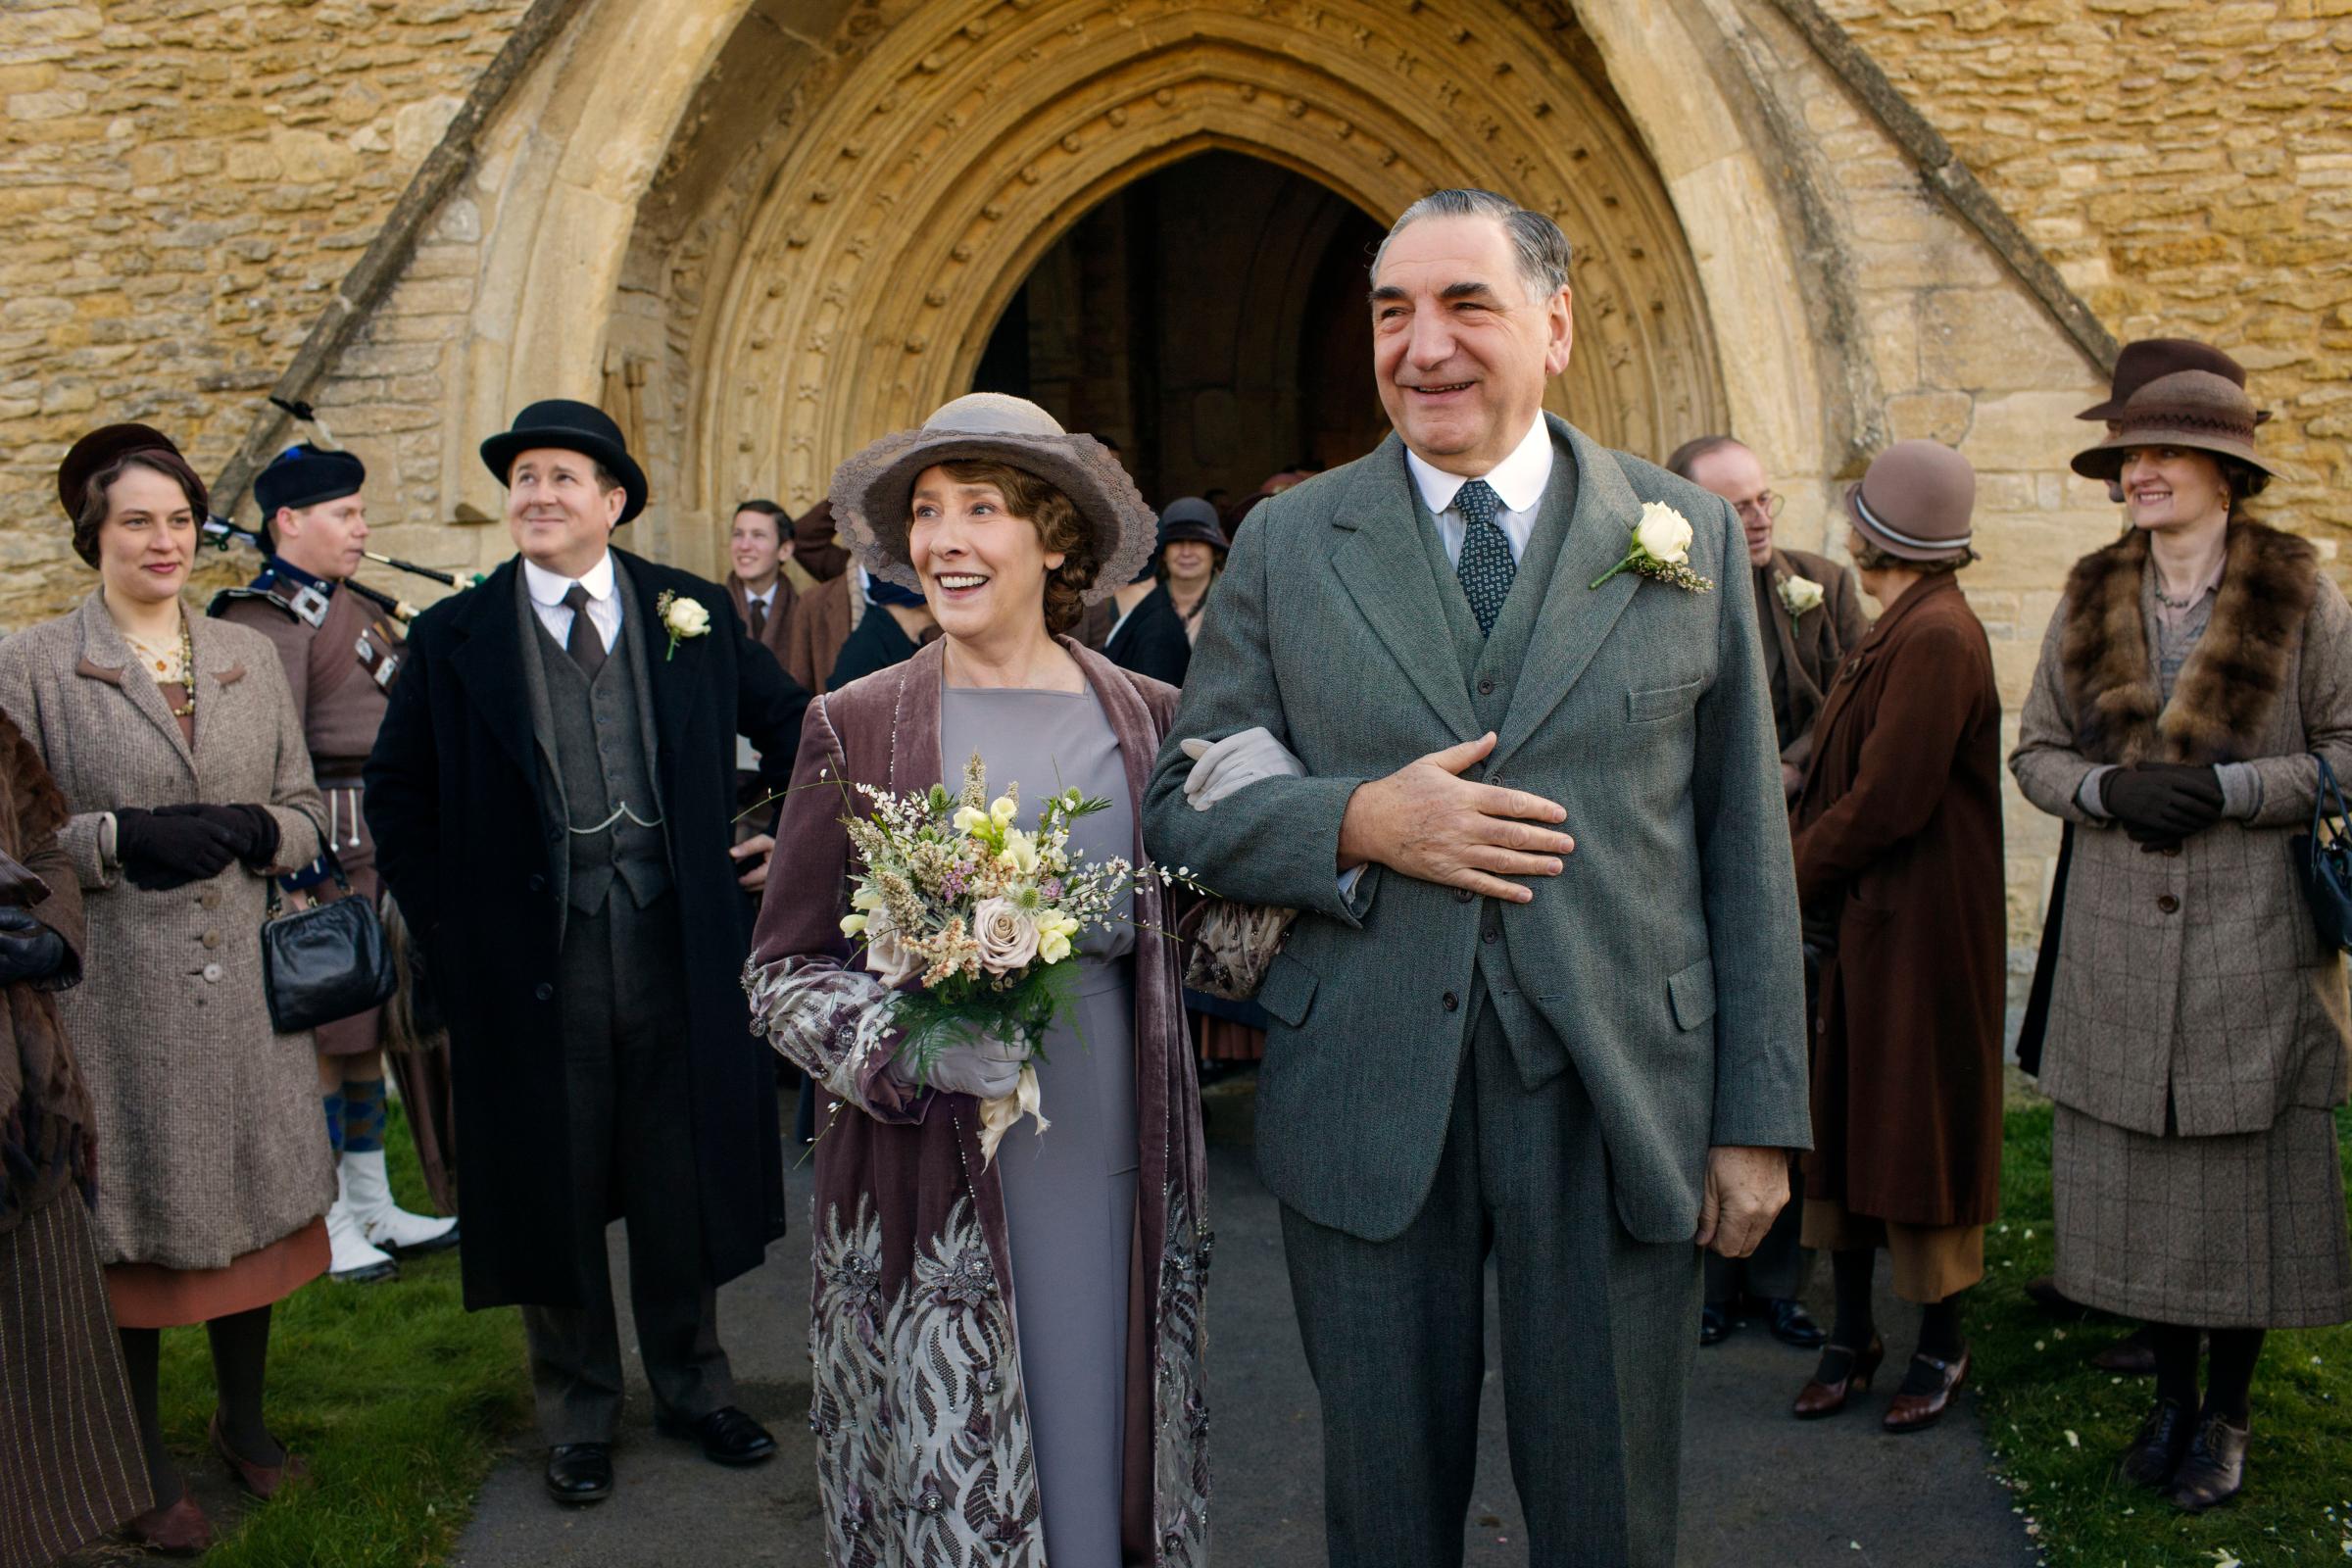 Downton AbbeyPart Three - Sunday, January 17, 2016 at 9pm ET on MASTERPIECE on PBSA wedding dress drama takes a disastrous turn. The breakfast battle is settled. A handsome volunteer helps Edith meet a deadline. The hospital debate gets nasty. Shown from left to right: Phyllis Logan as Mrs. Hughes and Jim Carter as Mr. Carson (C) Nick Briggs/Carnival Film &amp; Television Limited 2015 for MASTERPIECE This image may be used only in the direct promotion of MASTERPIECE CLASSIC. No other rights are granted. All rights are reserved. Editorial use only. USE ON THIRD PARTY SITES SUCH AS FACEBOOK AND TWITTER IS NOT ALLOWED.